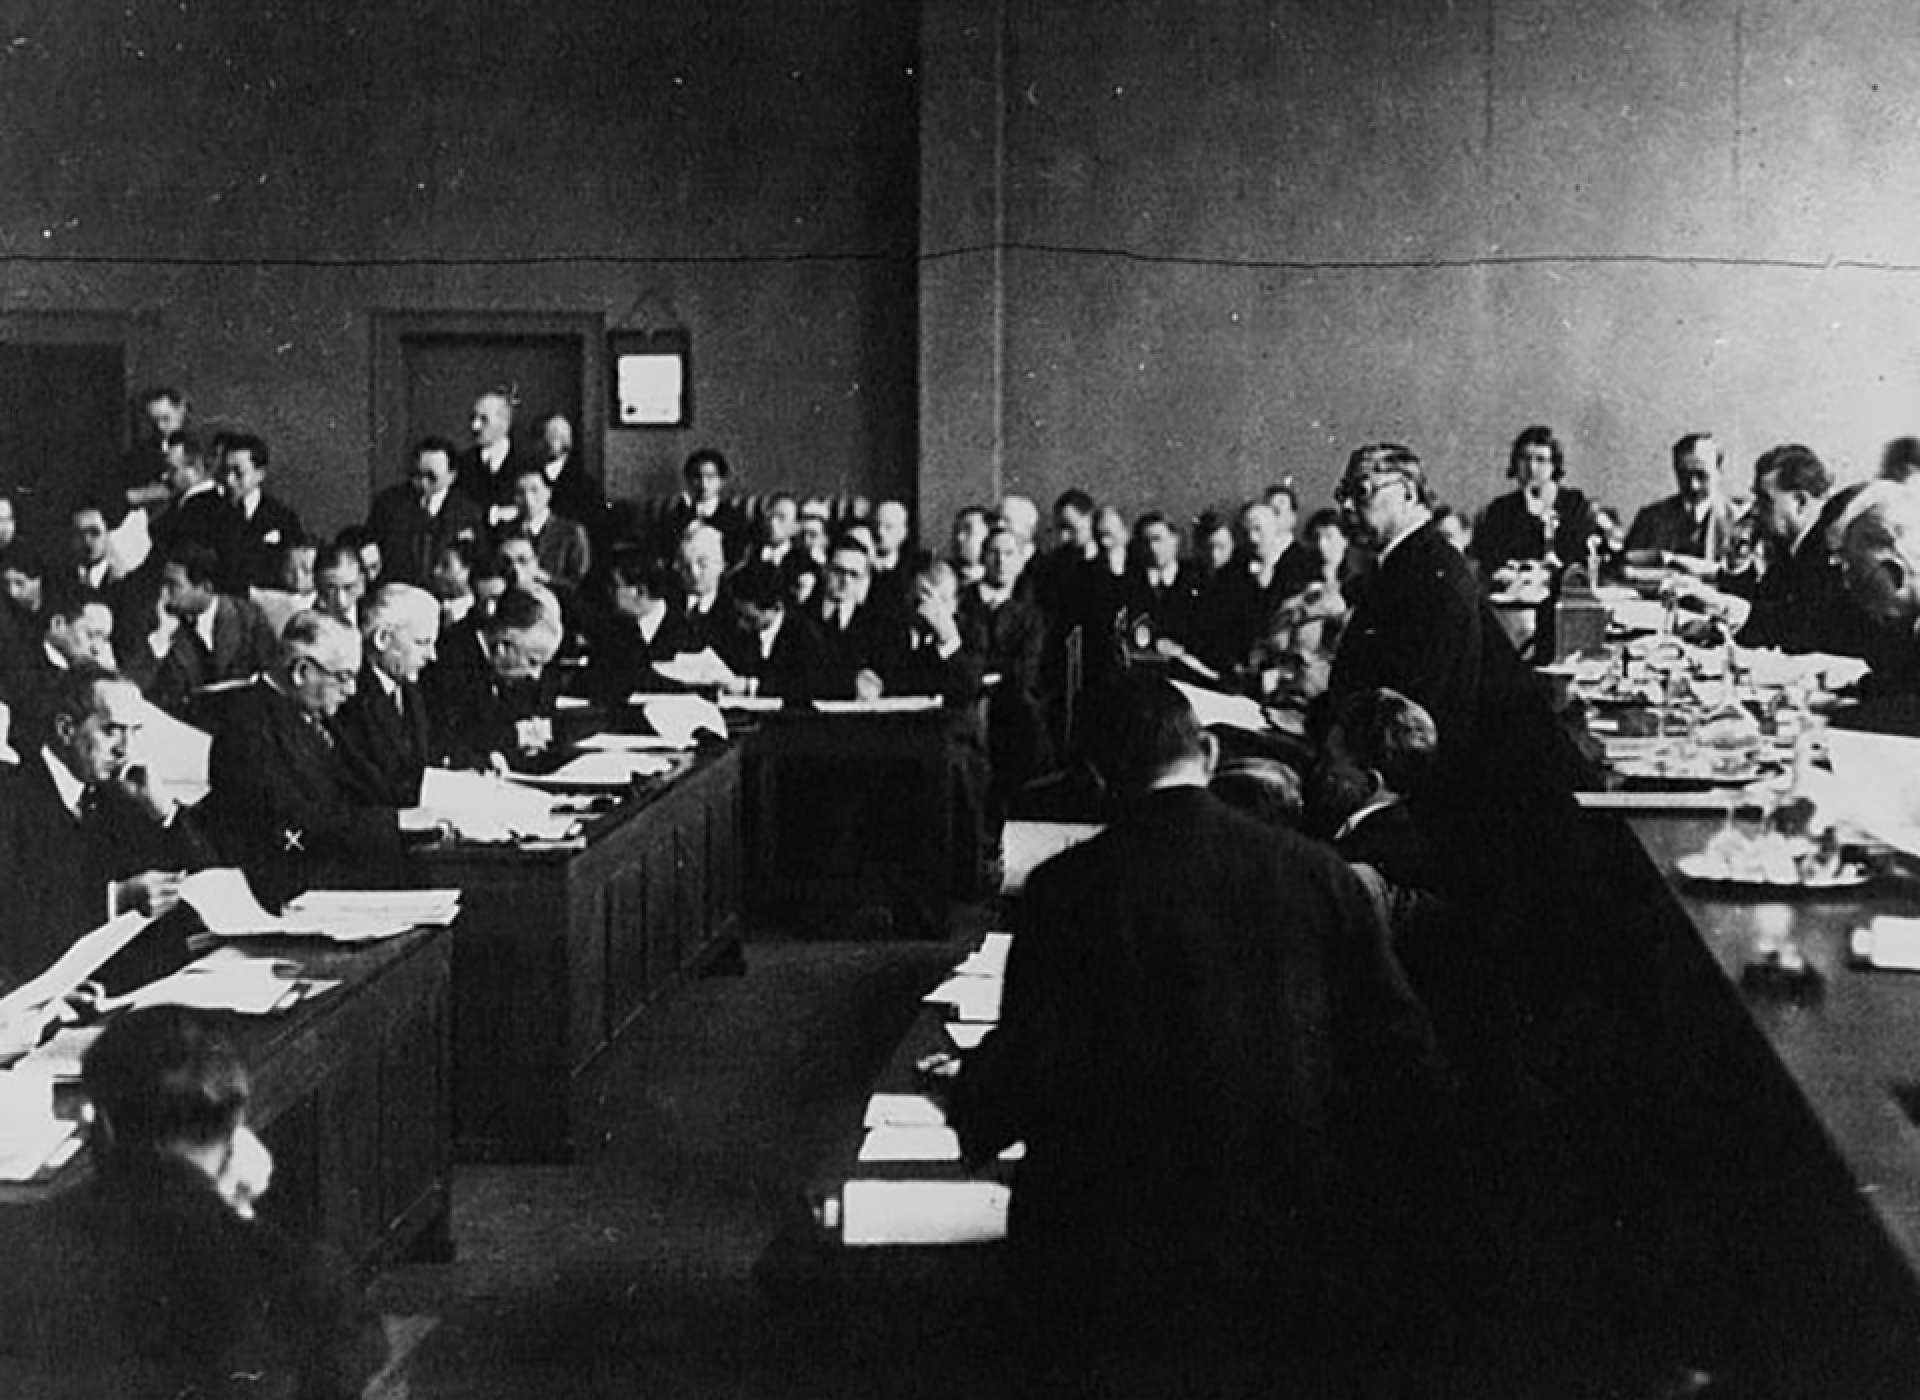 Chinese delegates address the League of Nations after the Mukden Incident